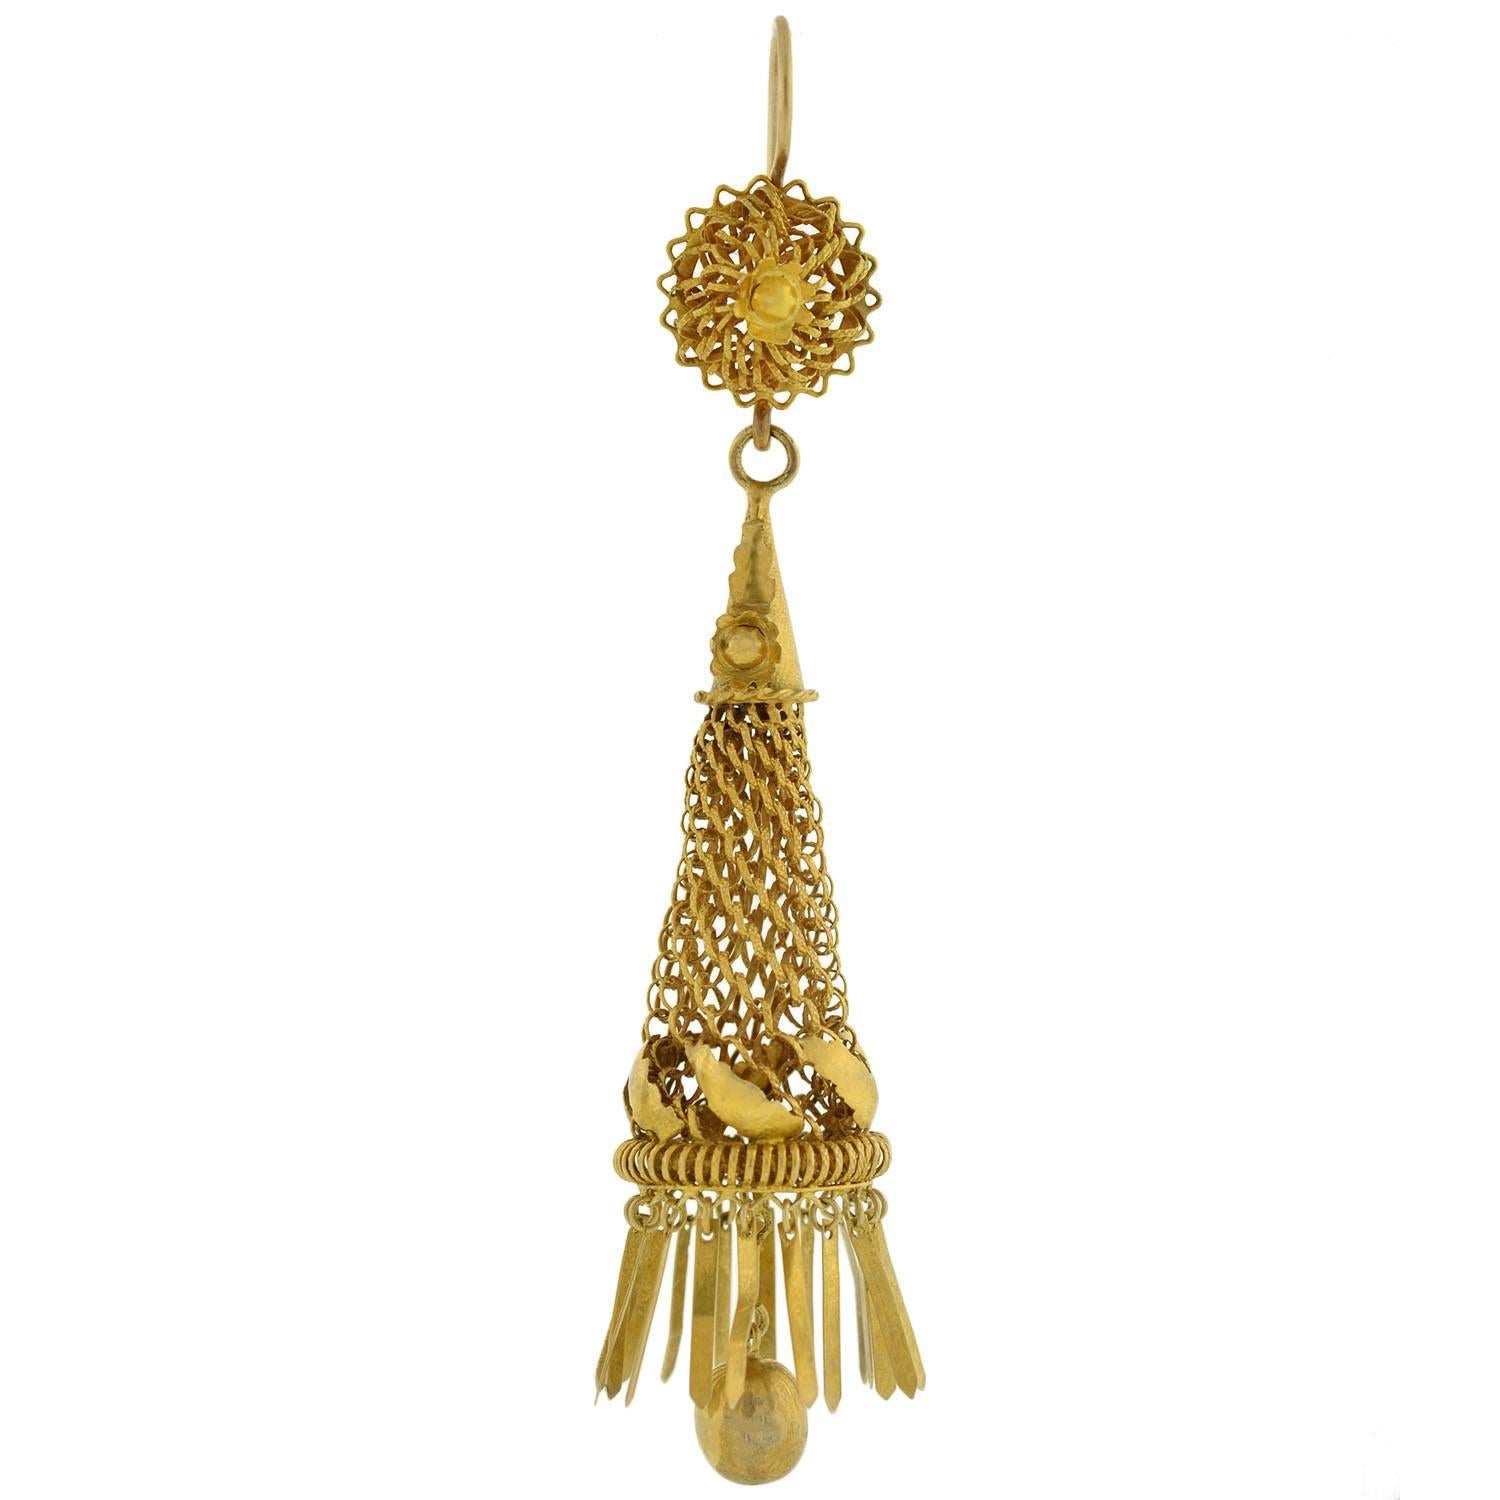 An incredible pair of rare hand wrought earrings from the Early Victorian (ca1850) era! These elaborate earrings are of English origin and are handcrafted in vibrant 15kt yellow gold. They have a intricate design that incorporates finely woven gold